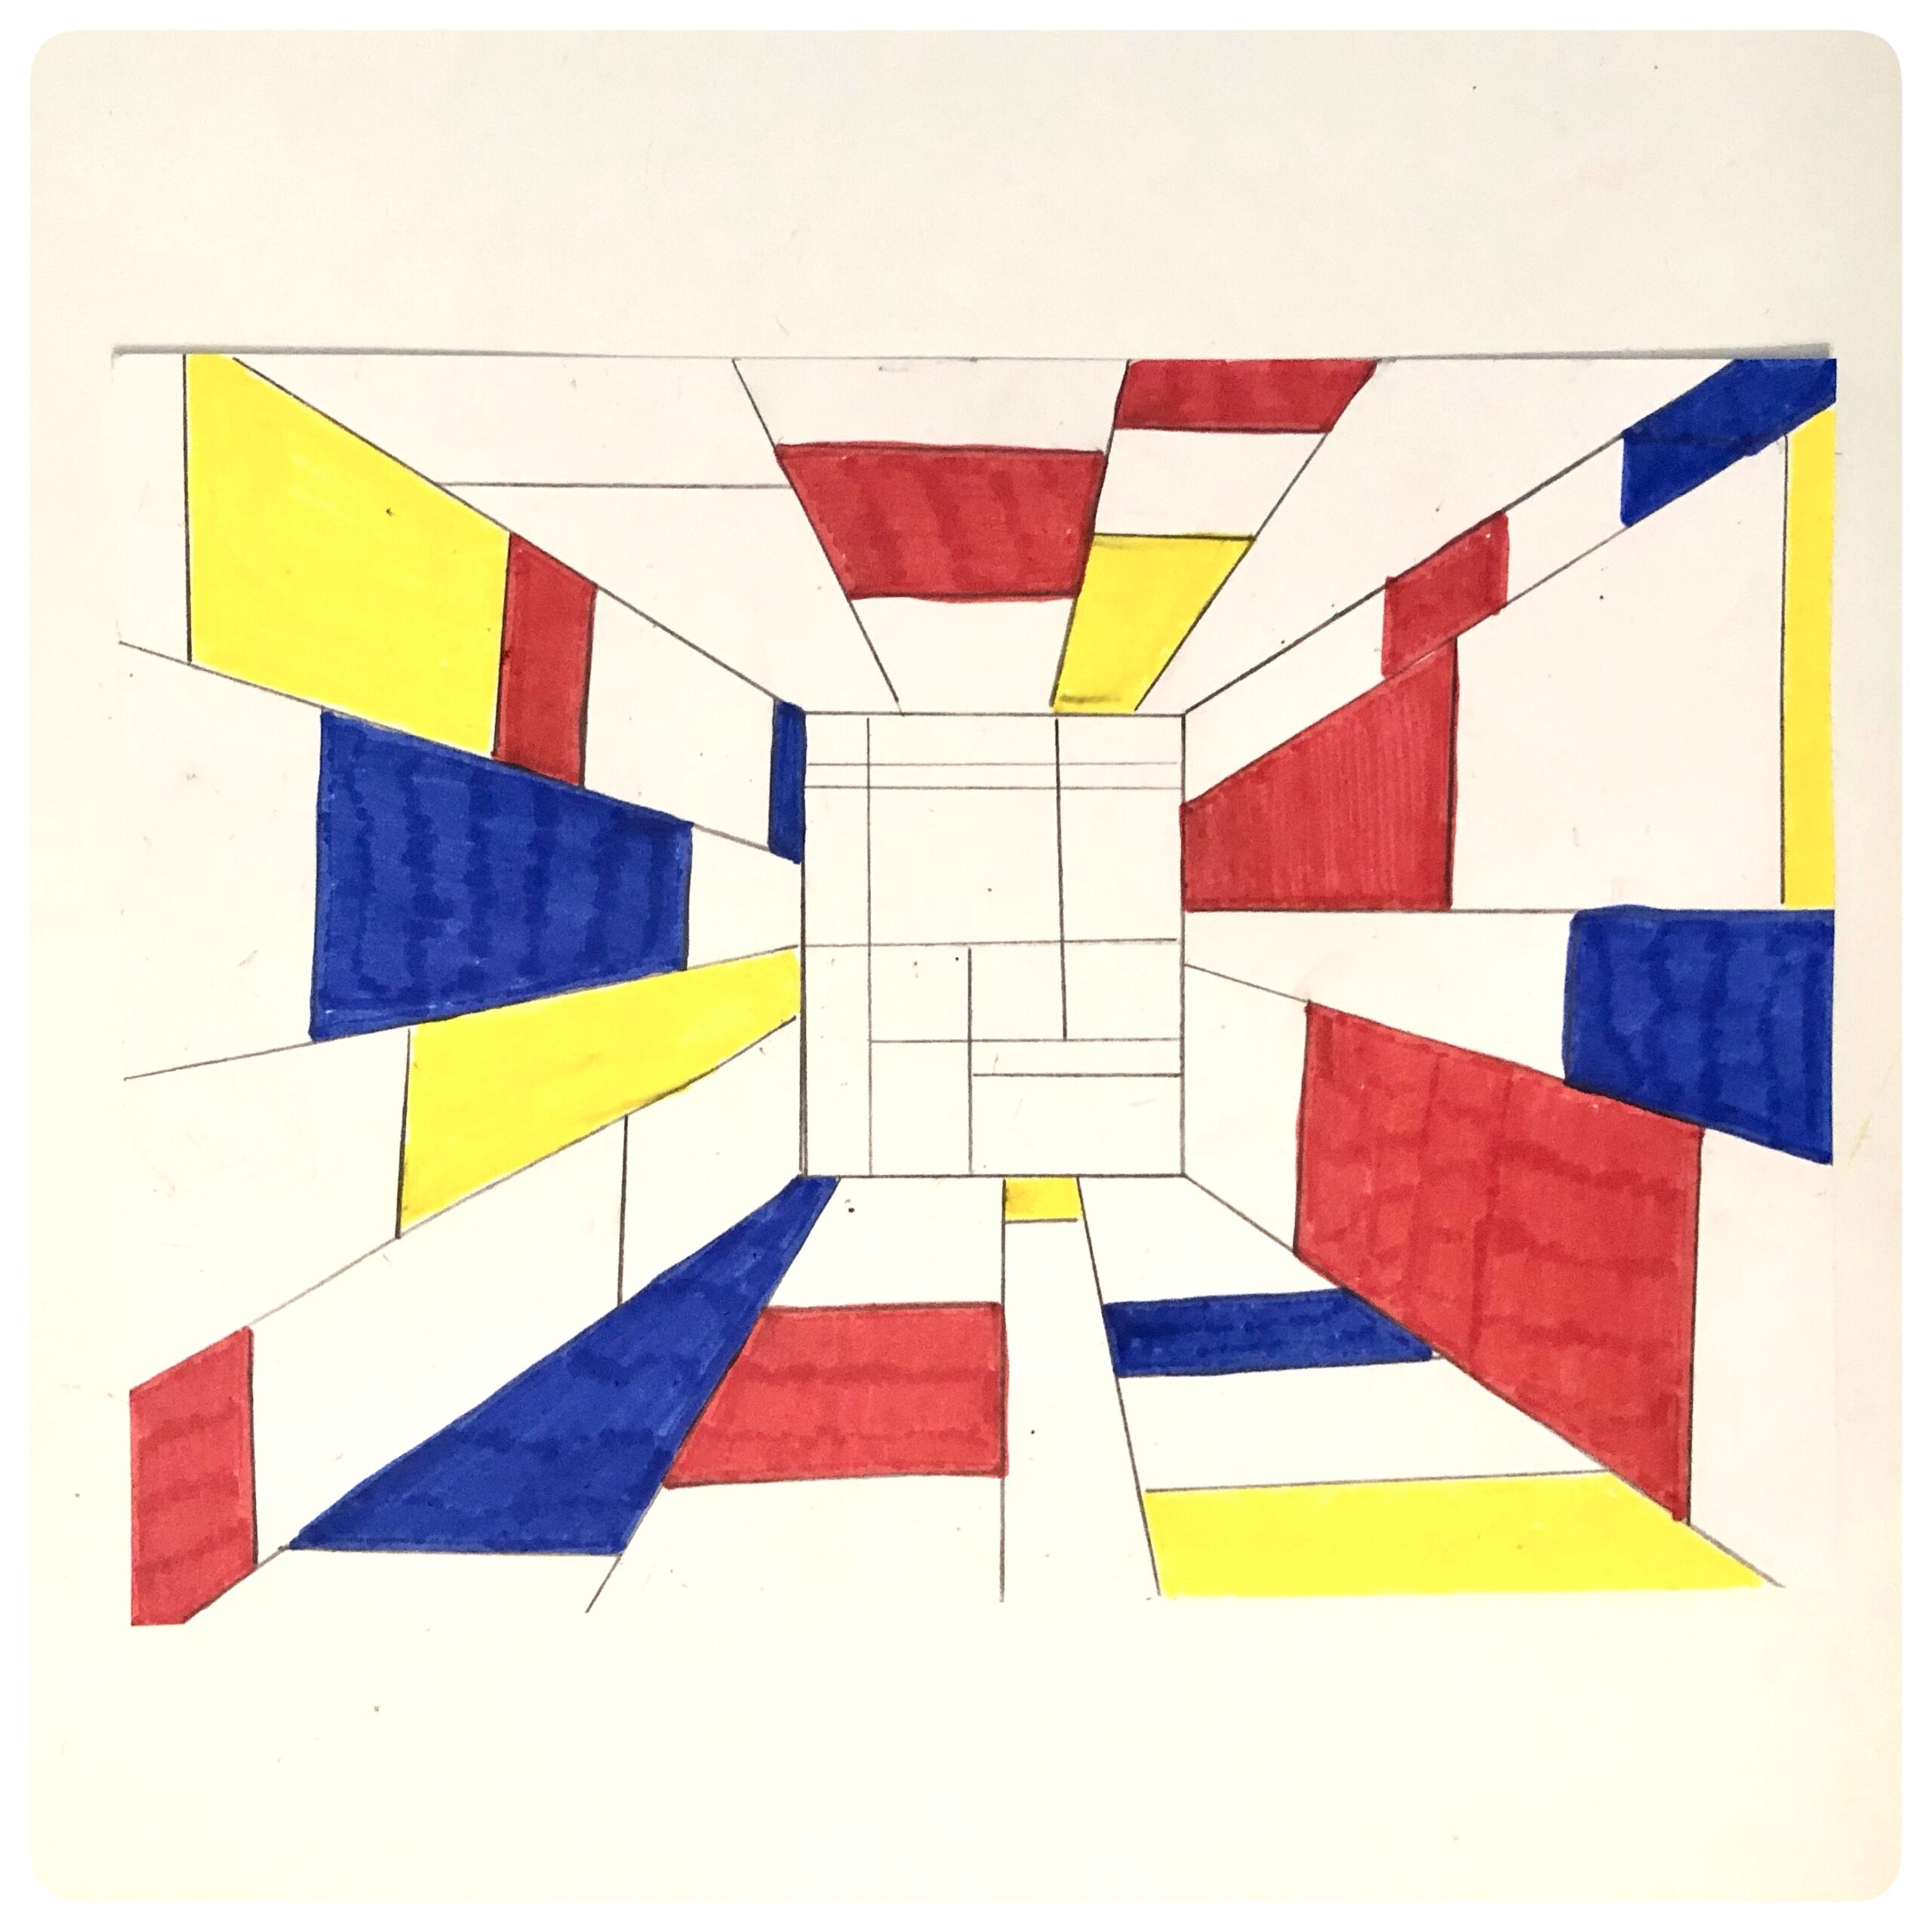 Perspective Drawing: Creating ways to think about abstract art while learning about Piet Mondrian